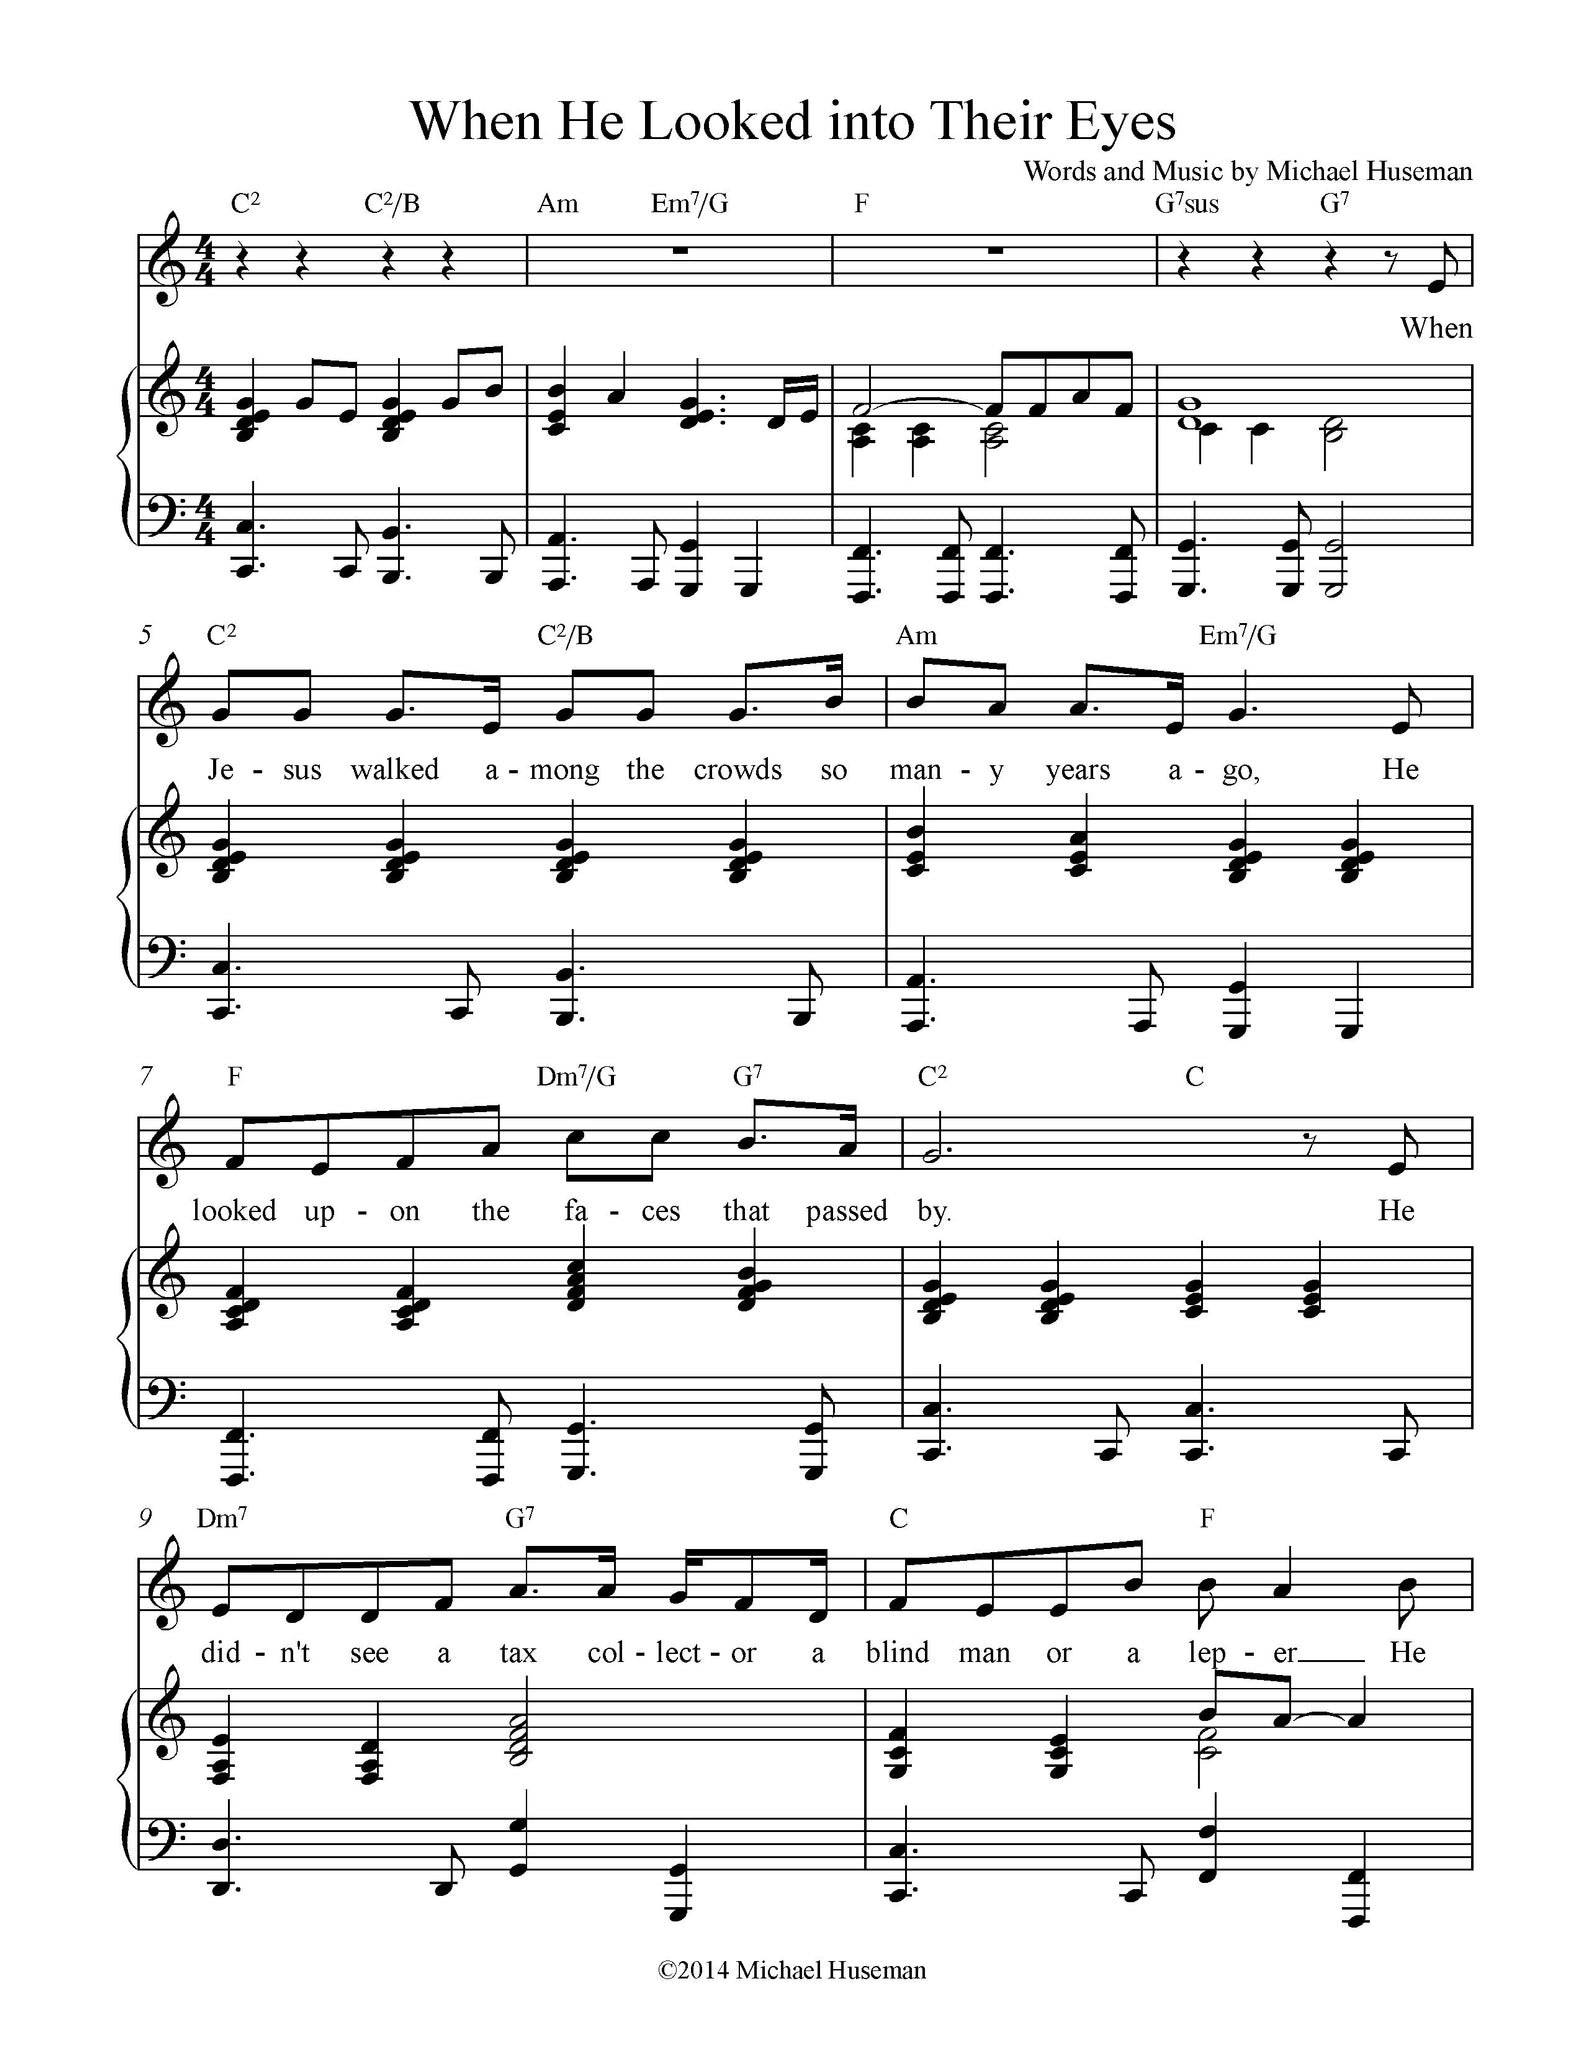 Sheet music for When He Looked into their Eyes